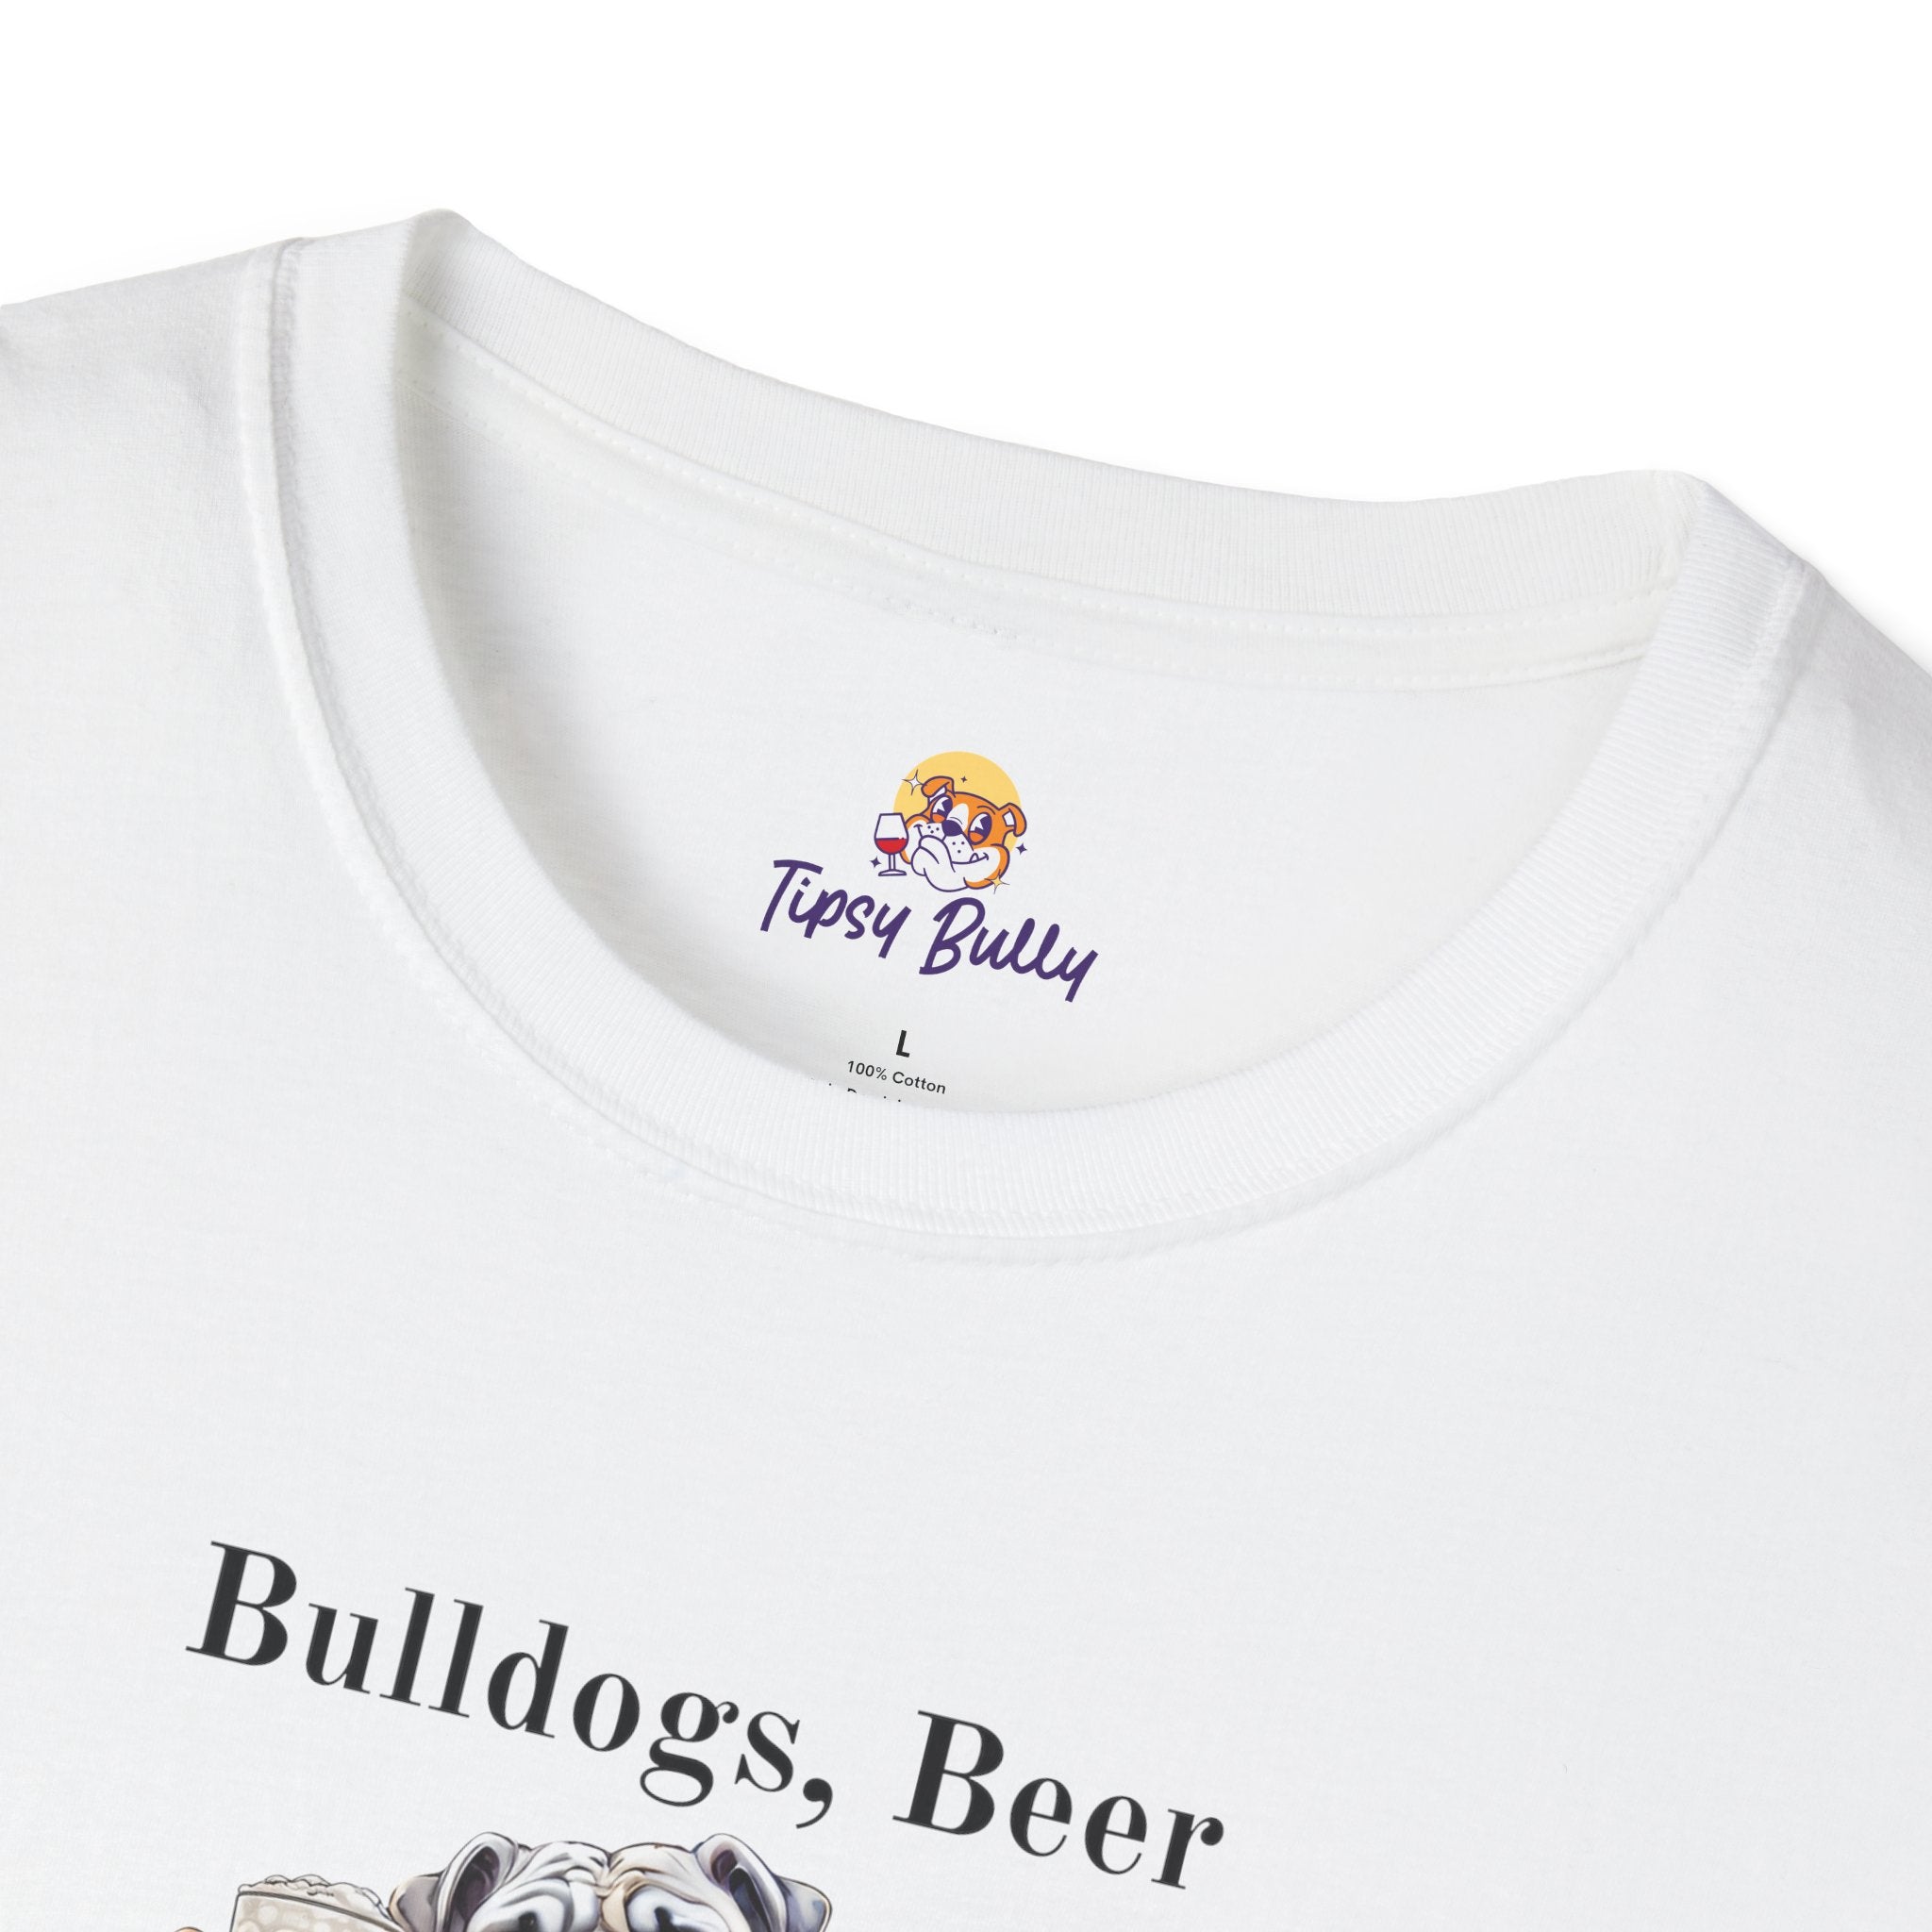 Bulldogs, Beer, and Bad Decisions" Unisex T-Shirt by Tipsy Bully (English/White)